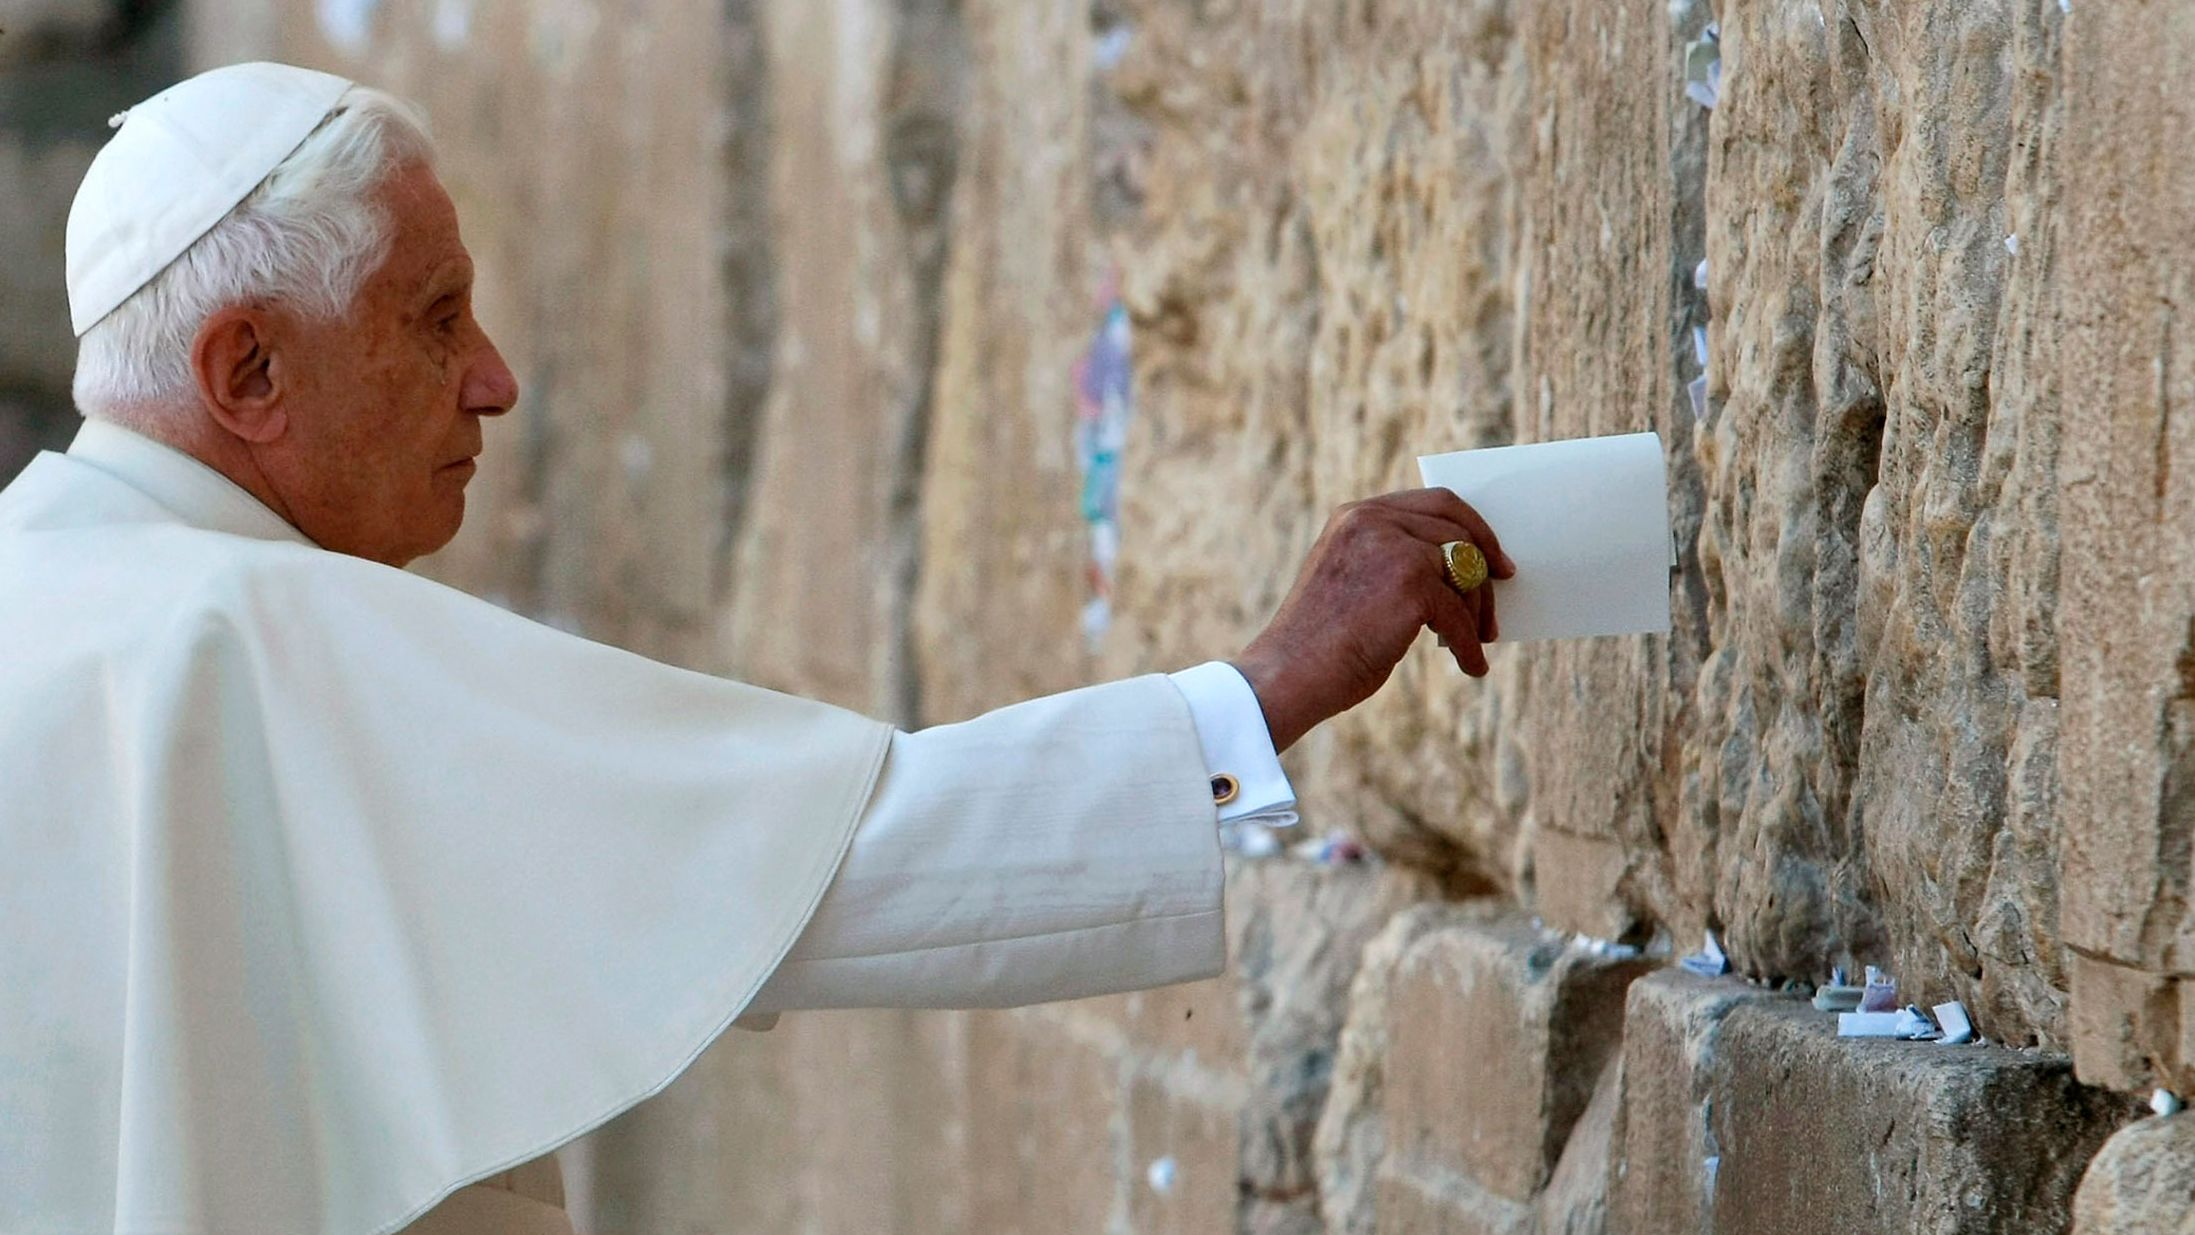 Benedict places a note in the Western Wall while visiting Jerusalem's Old City in May 2009.